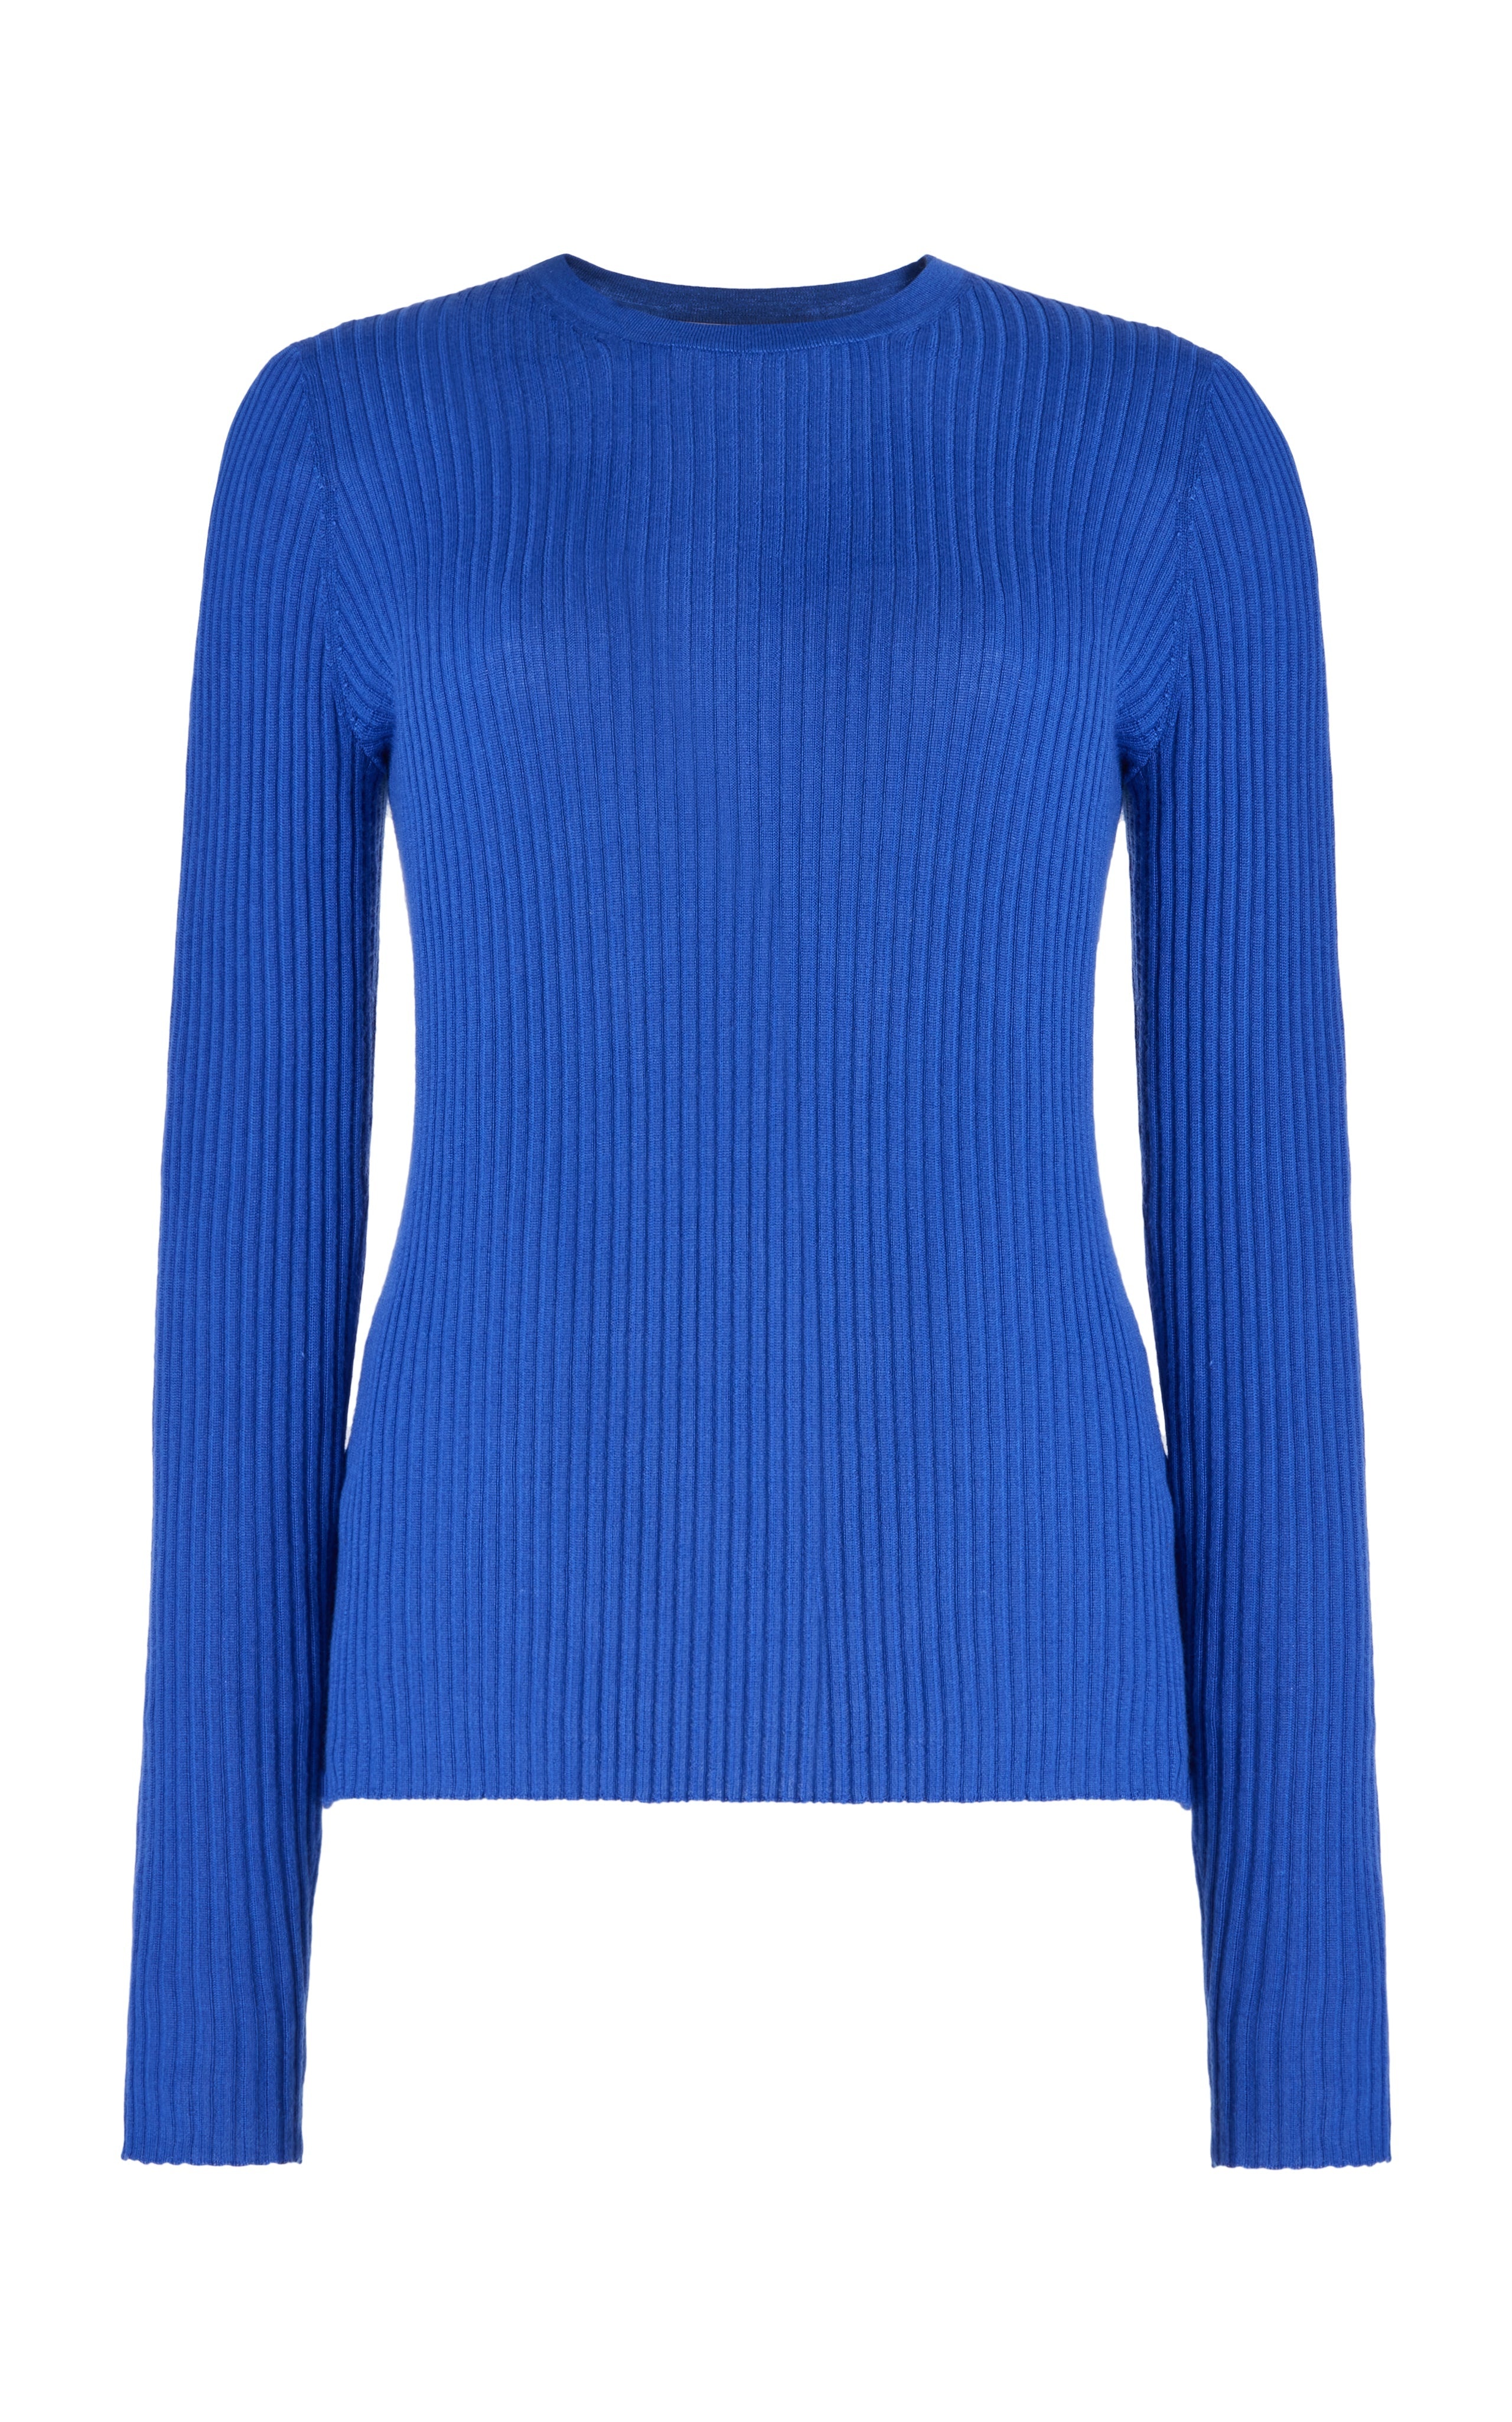 Browning Knit in Sapphire Silk Cashmere - 1